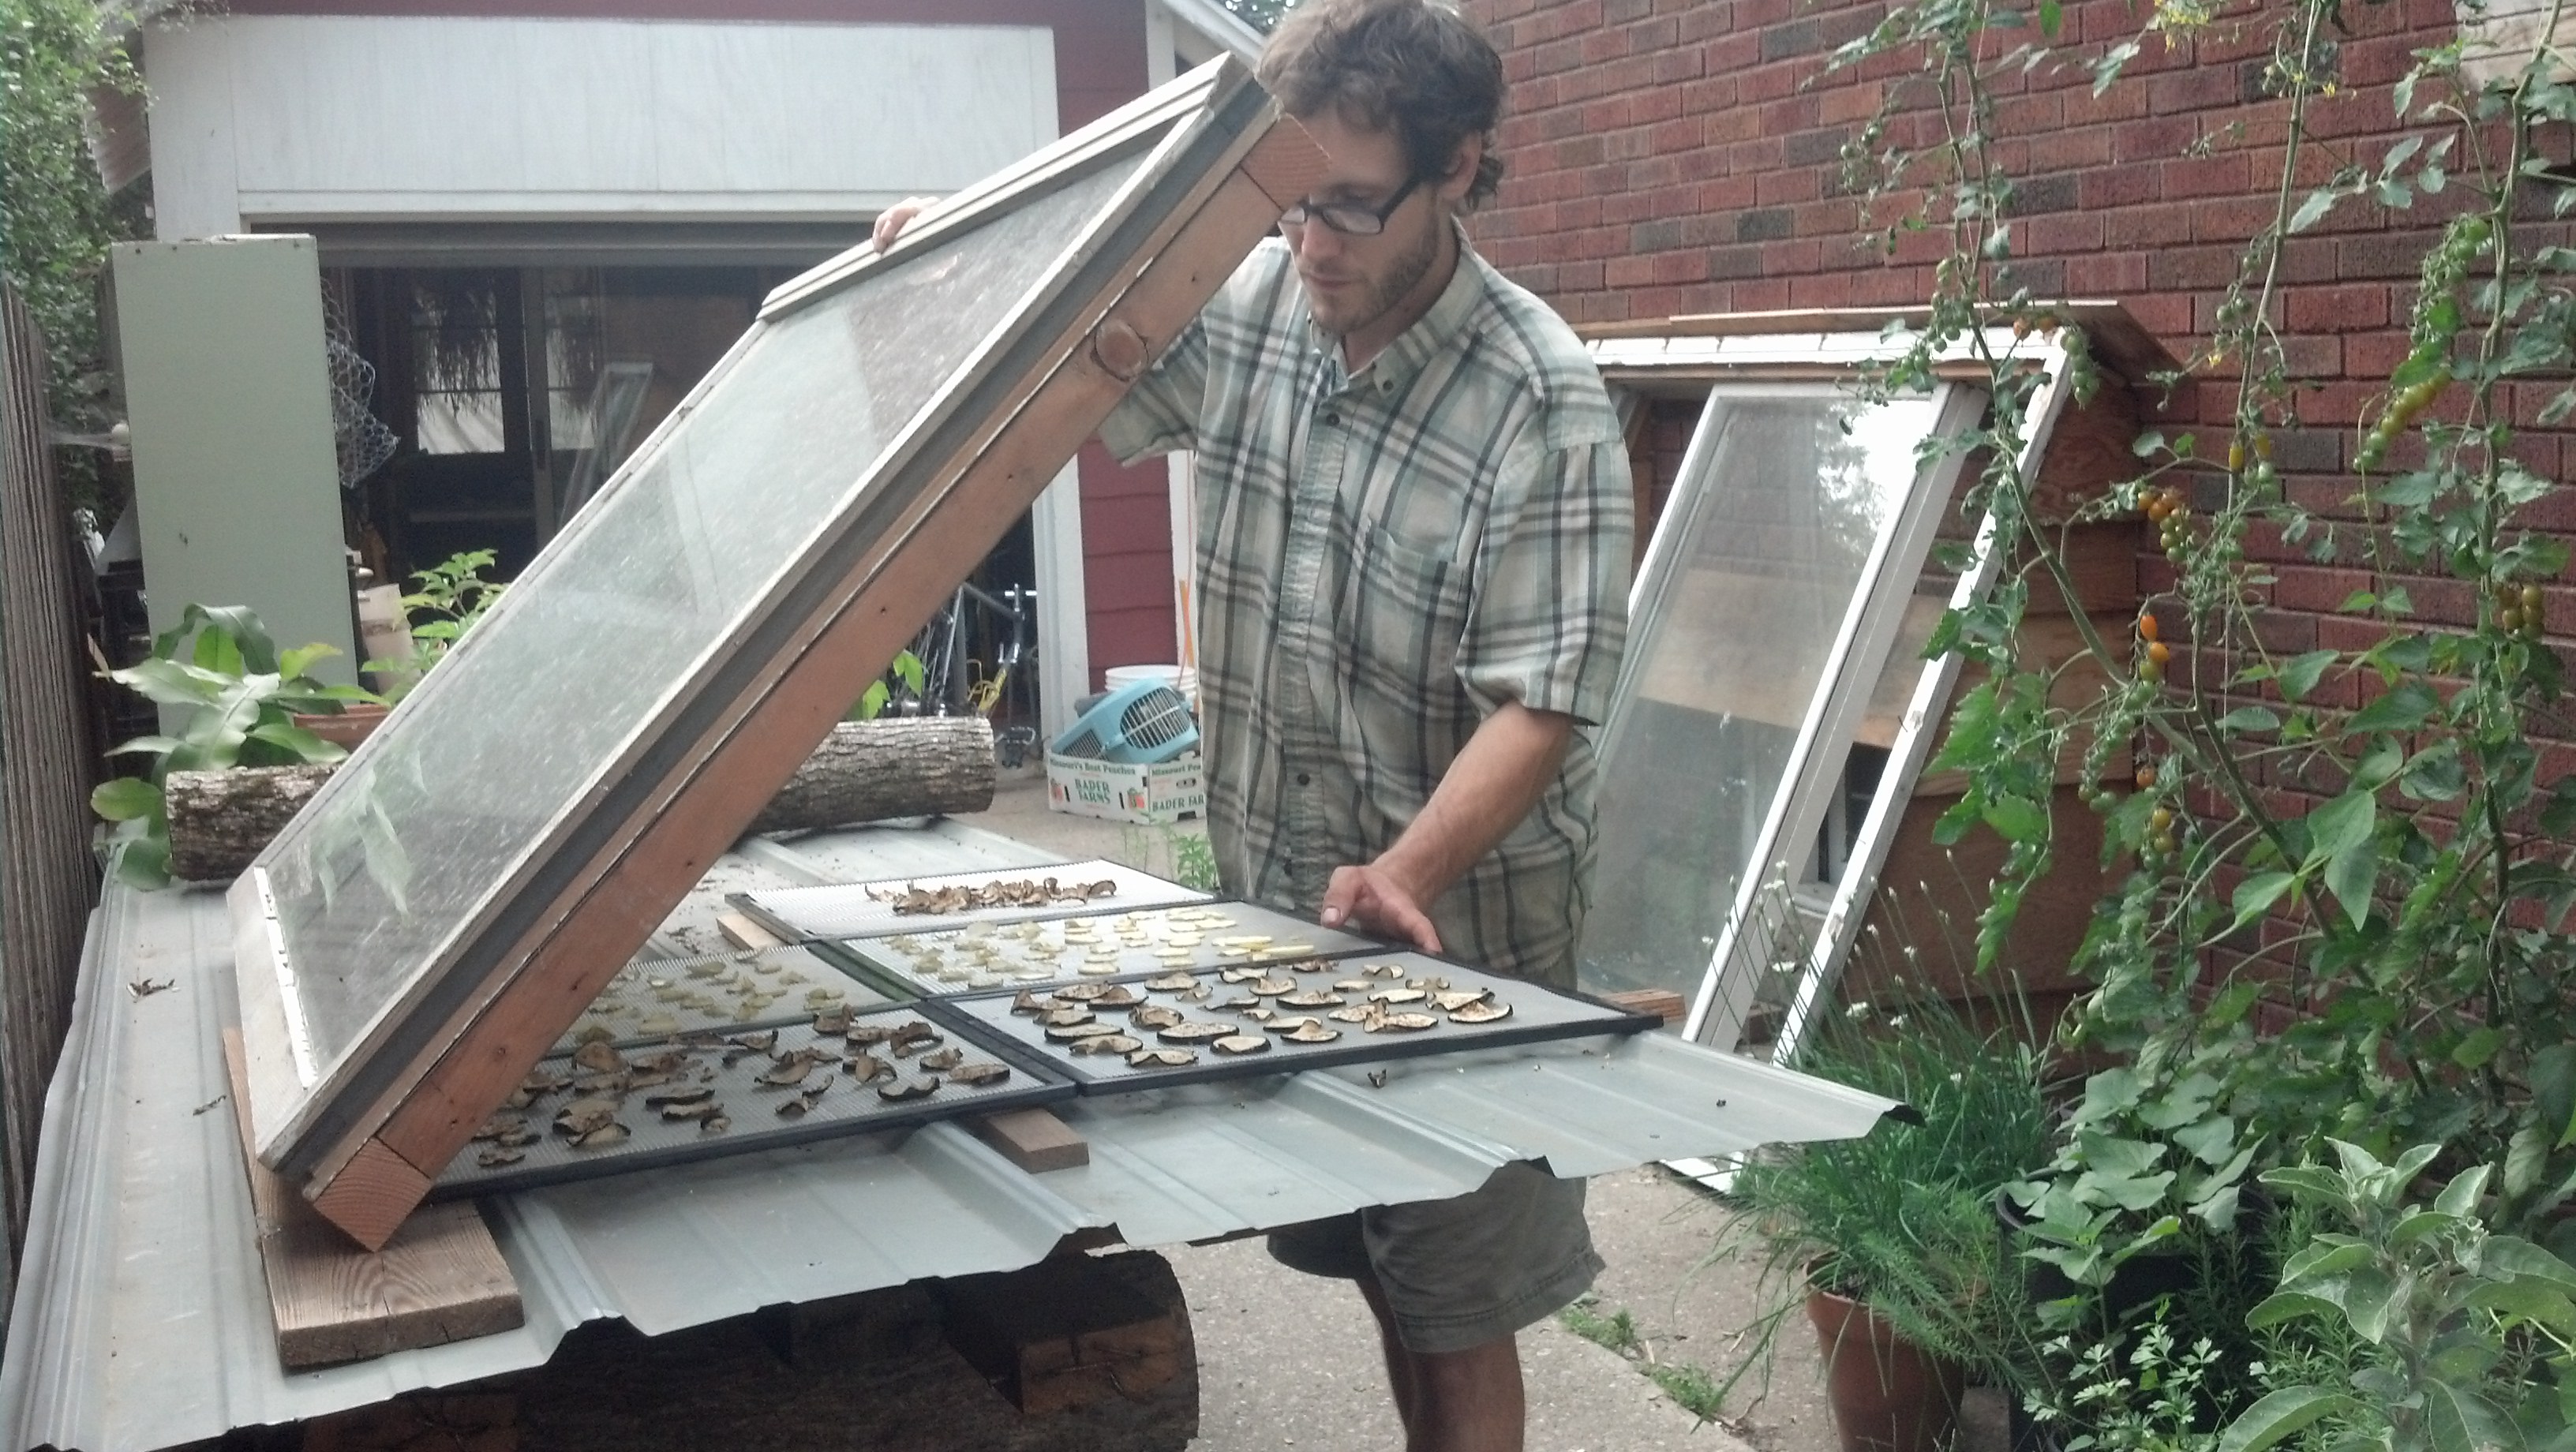 Garden party, solar food dehydrator demonstration, music and more in Iowa City Homegrown Iowan